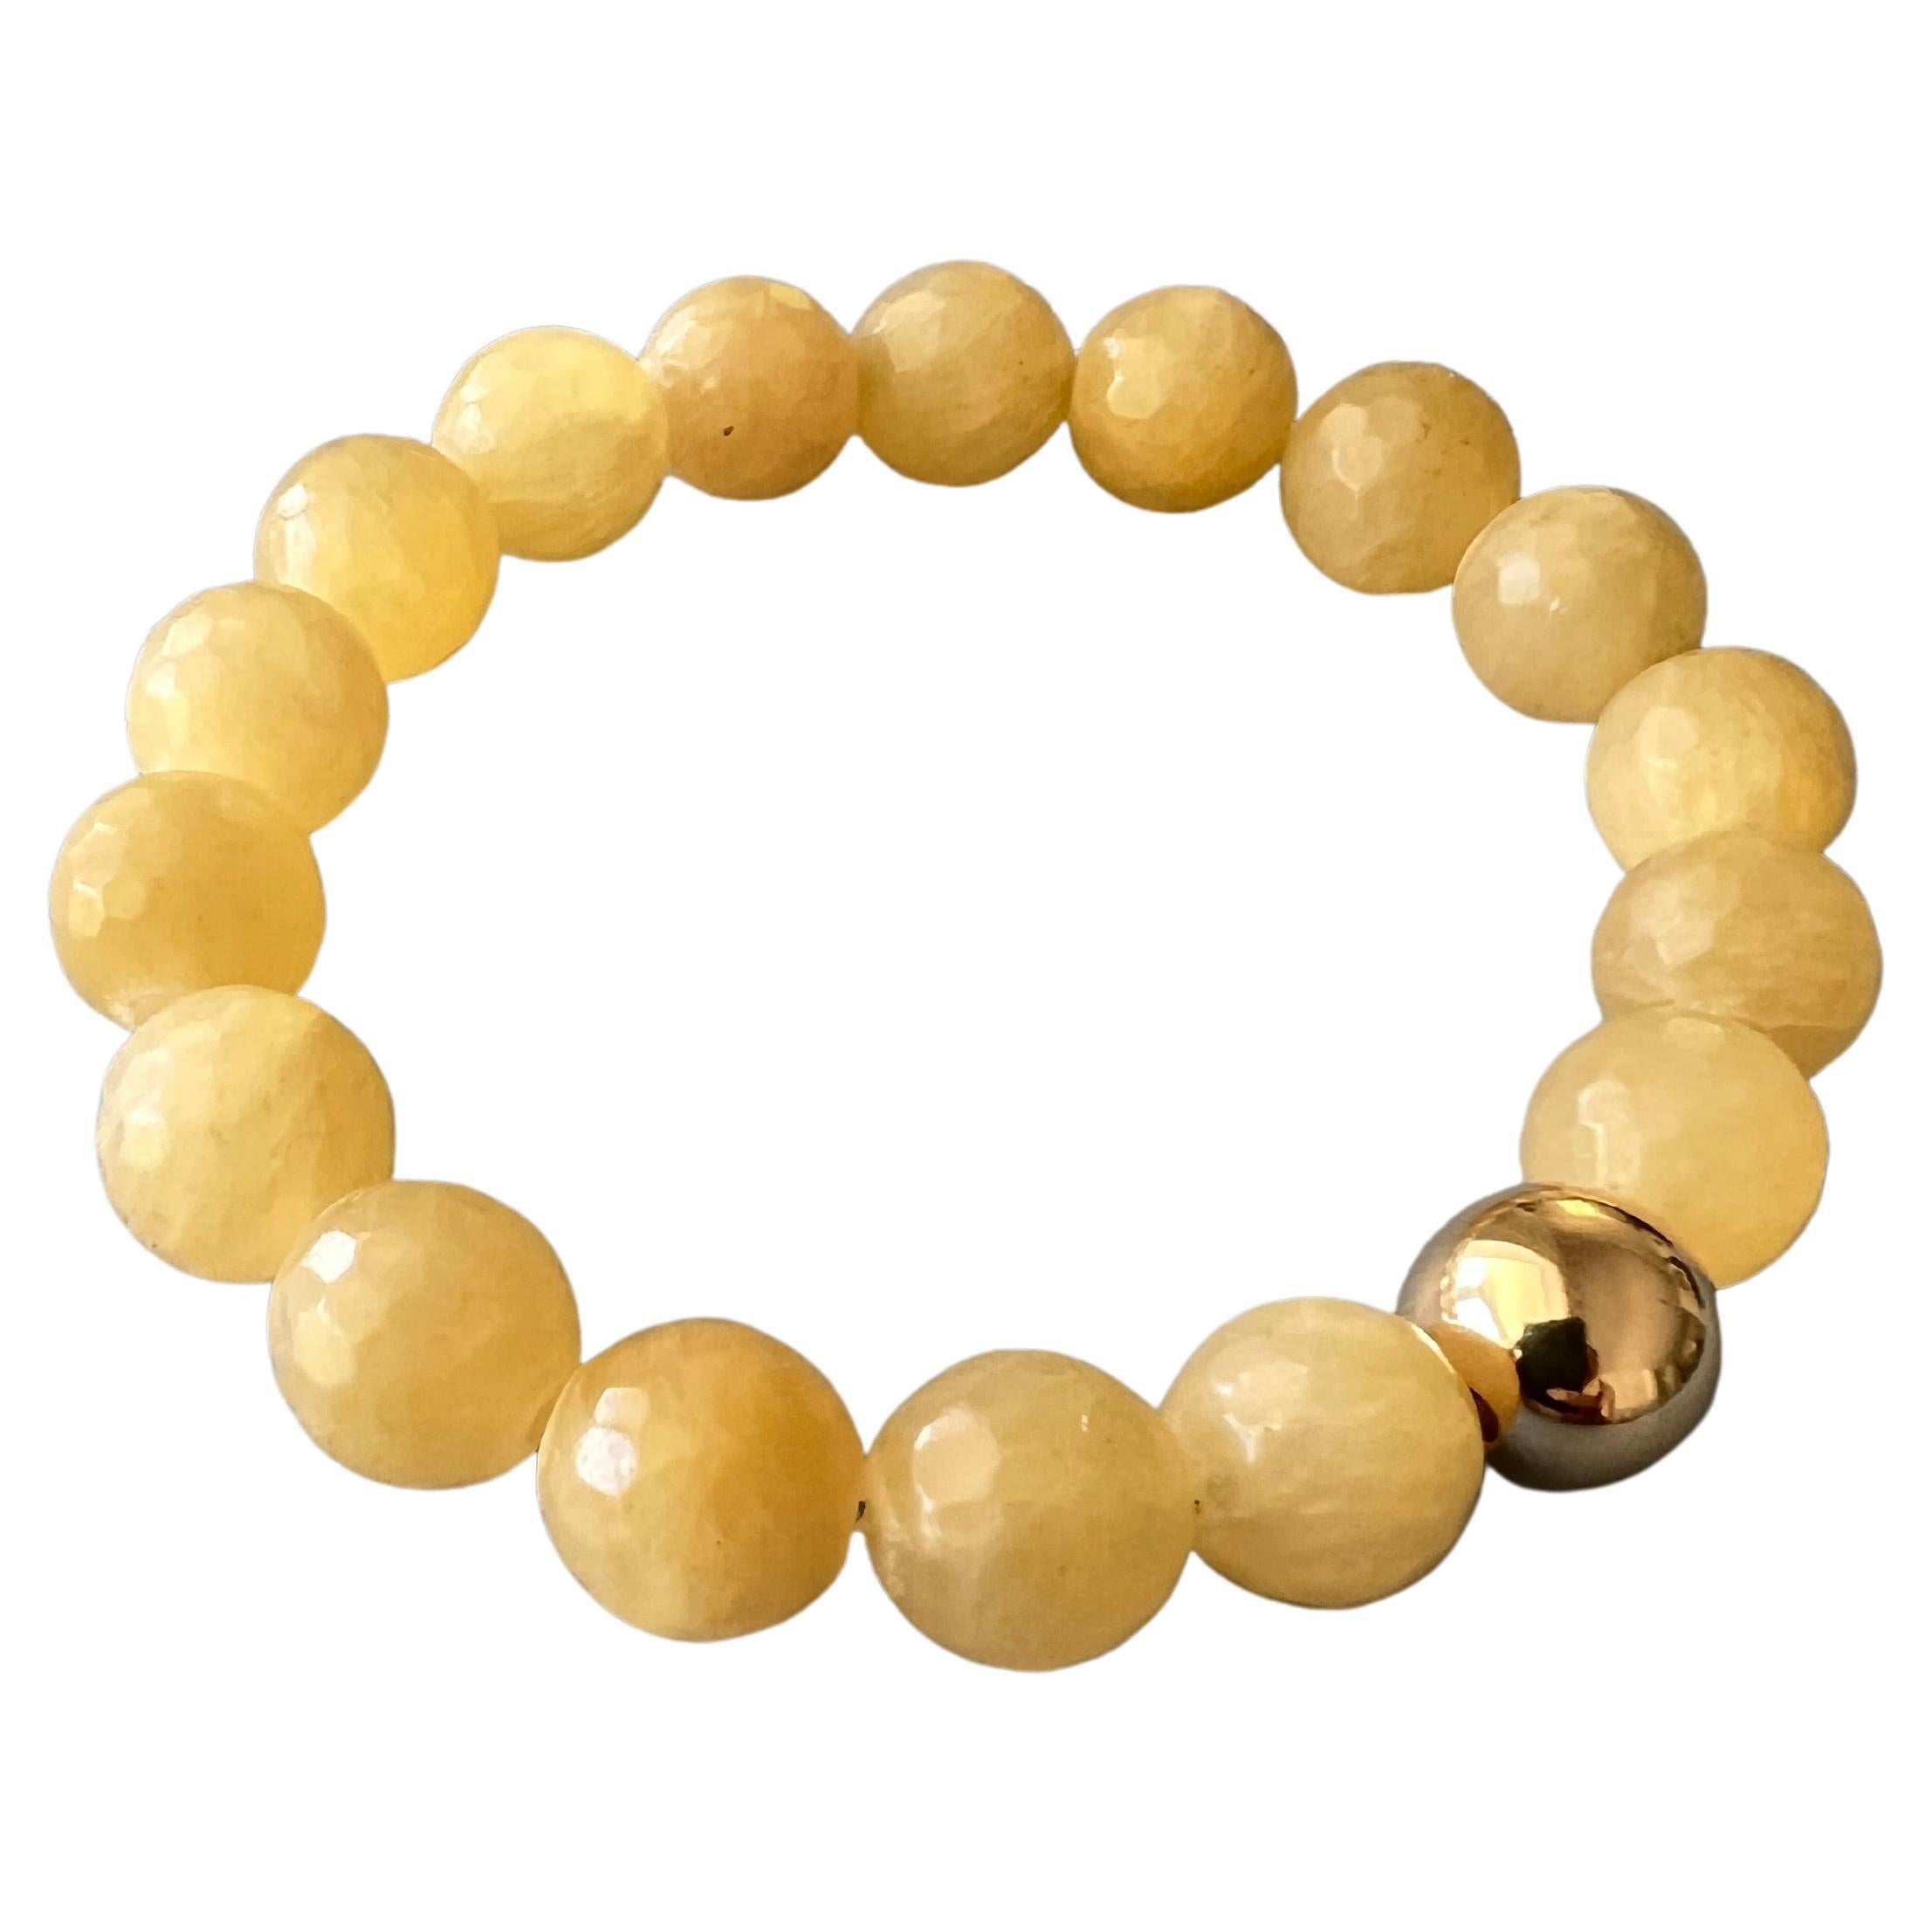 Yellow Calcite Round Facteted Bead Bracelet Gold Filled Bead J Dauphin For Sale